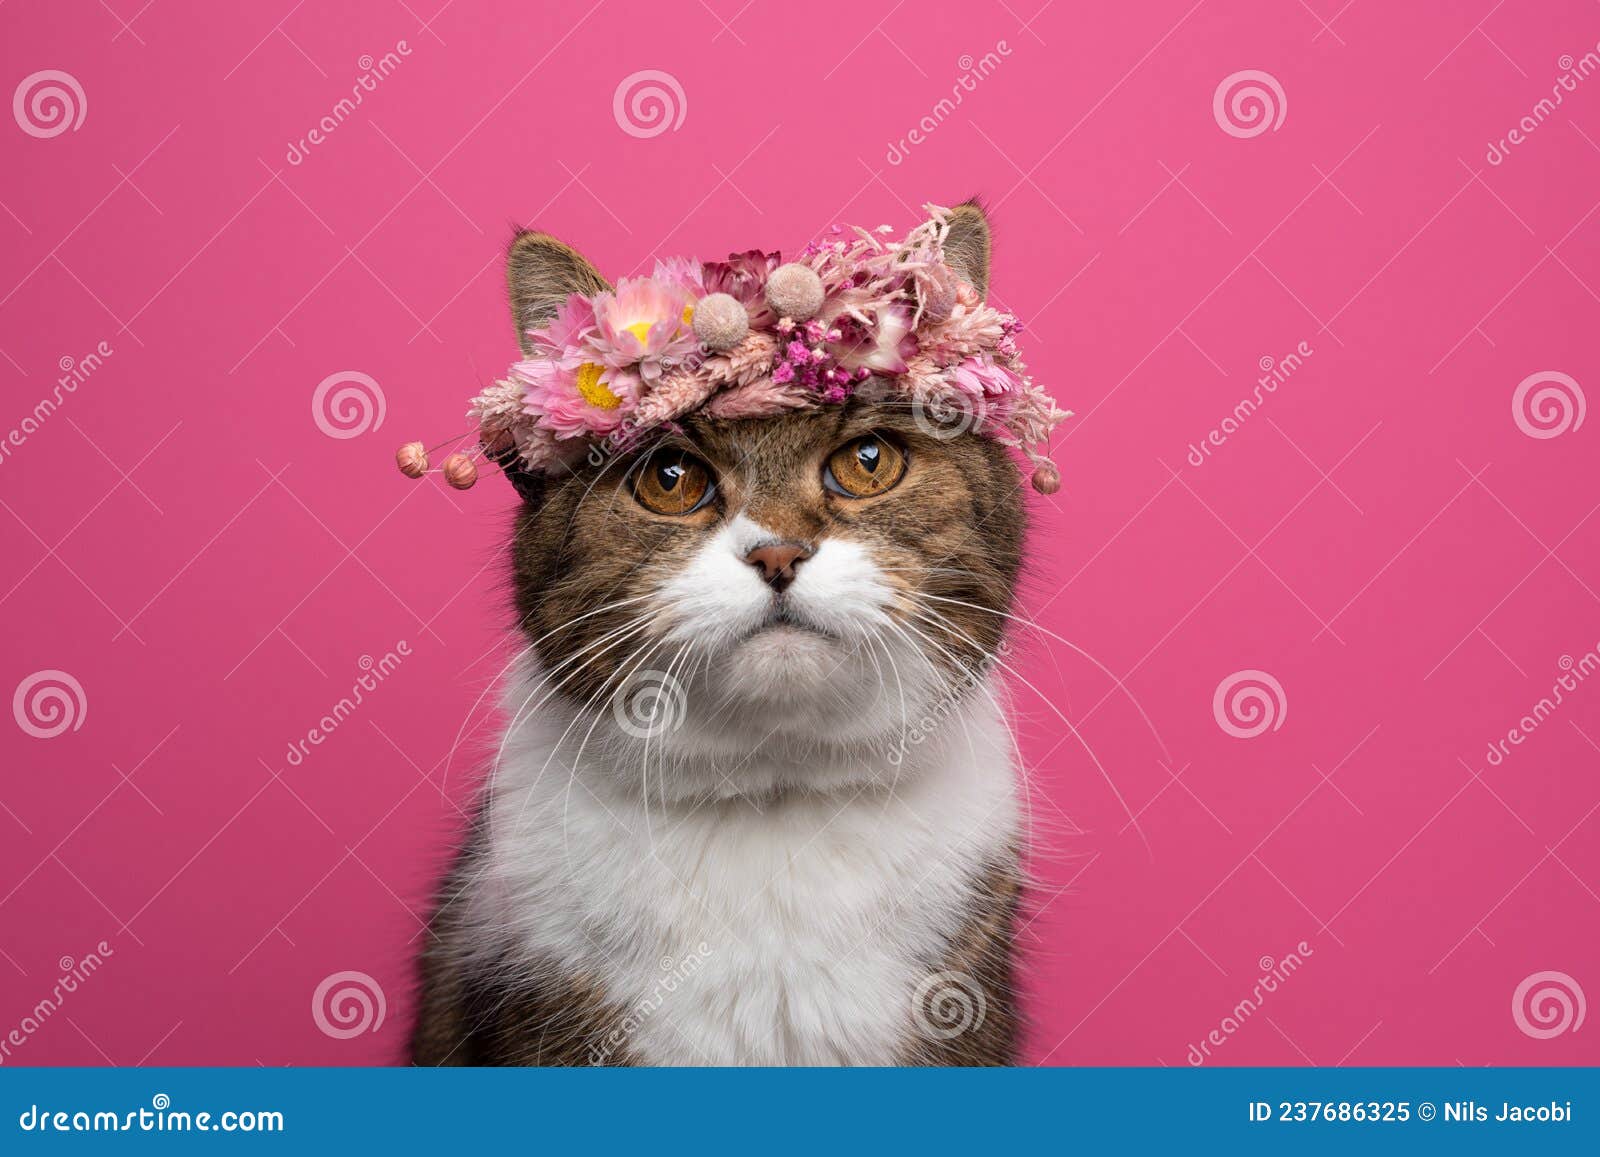 Cute Cat Wearing Flower Crown with Pink Dried Blossoms on Pink ...